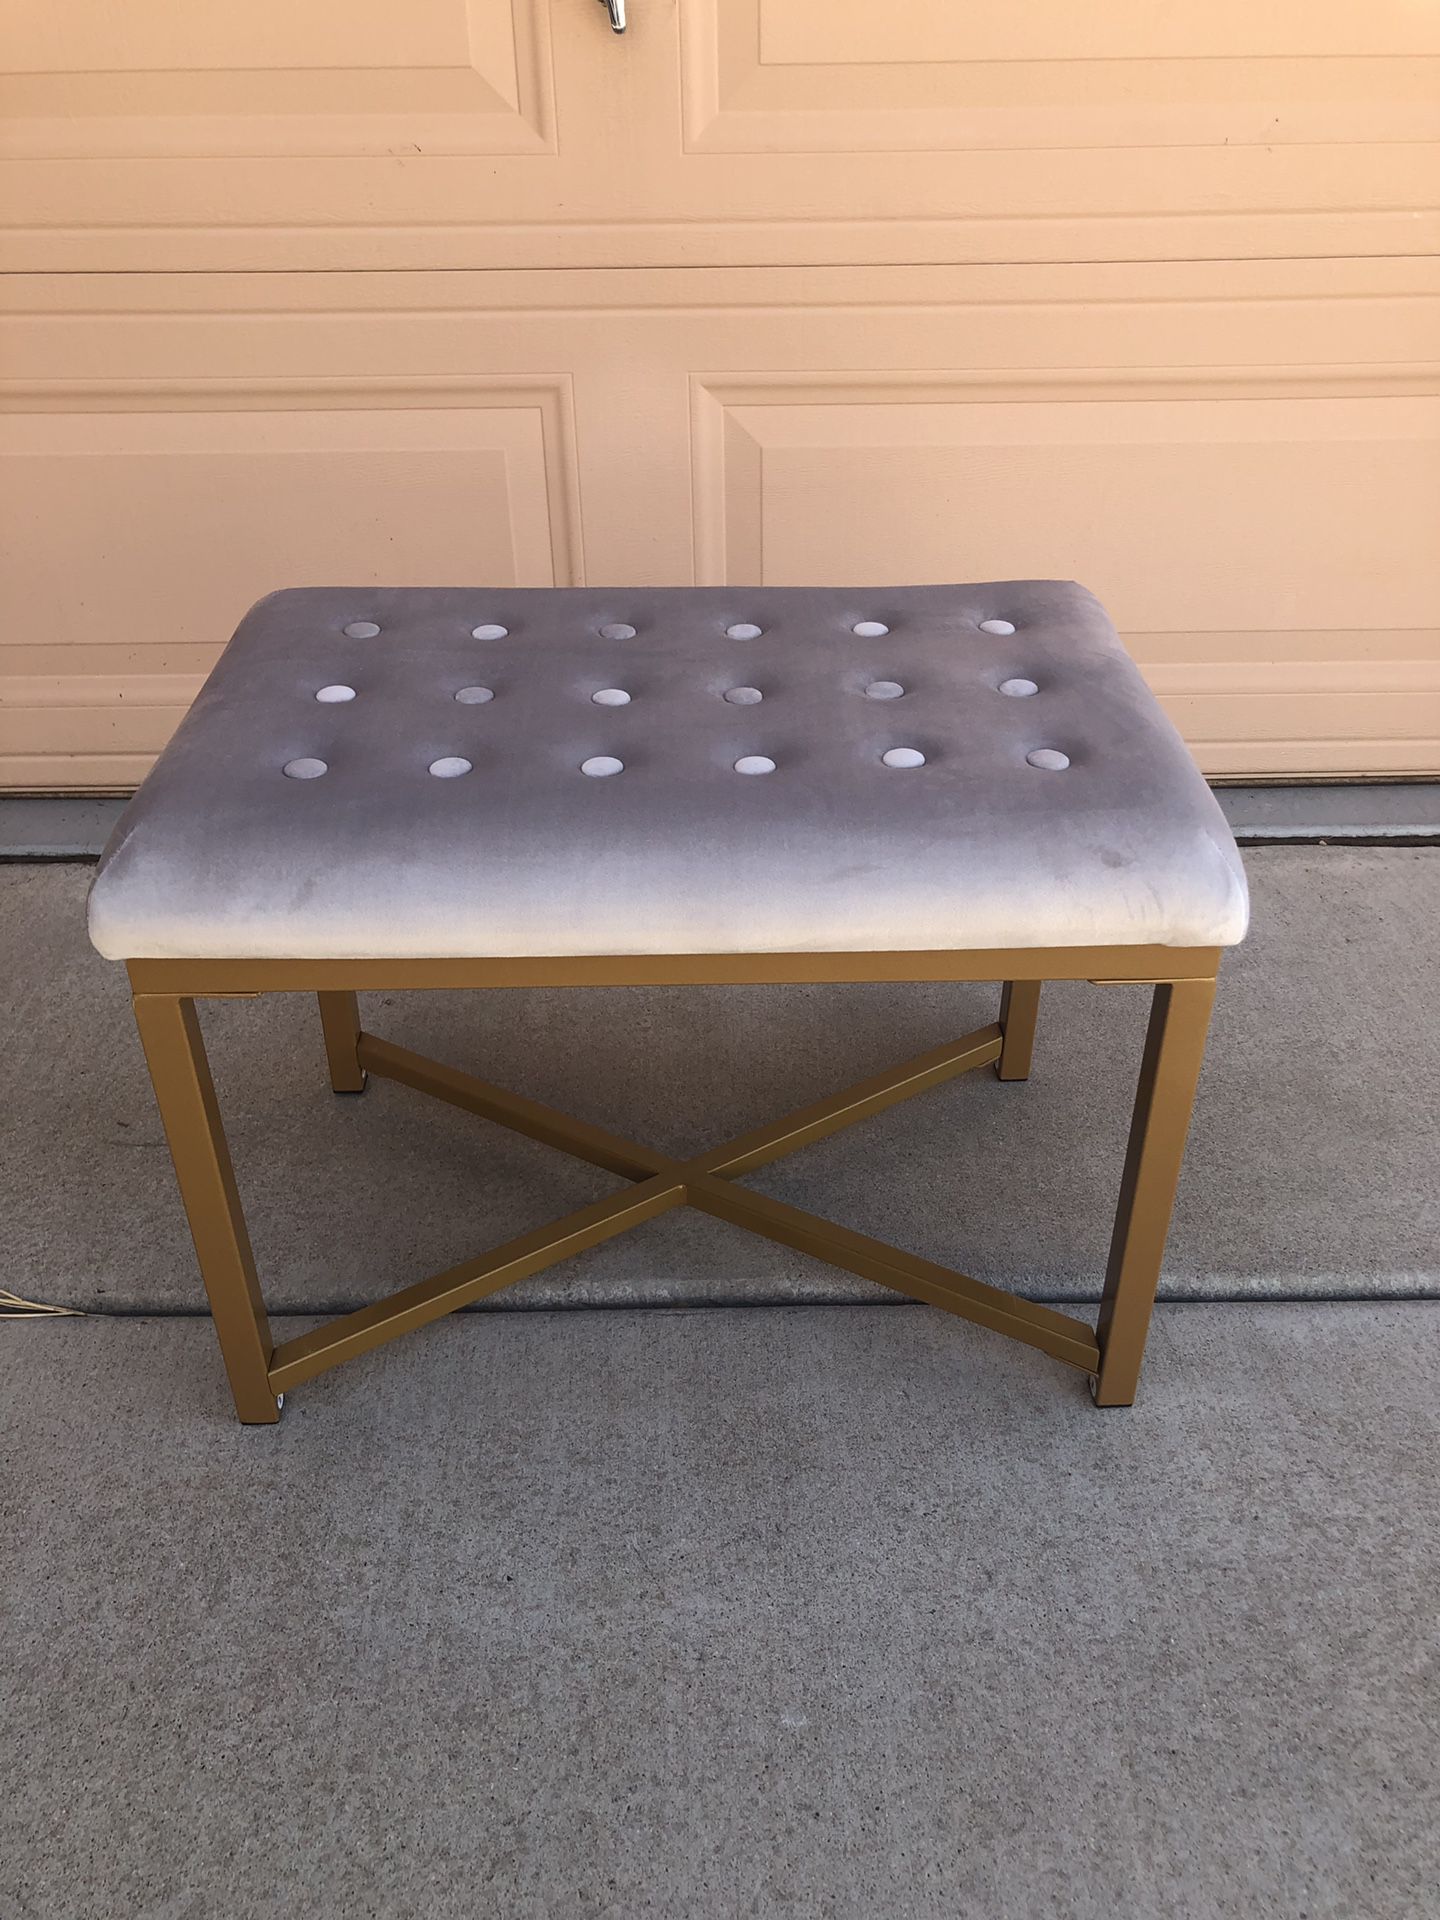 New Adorable Tufted Bench / Ottoman